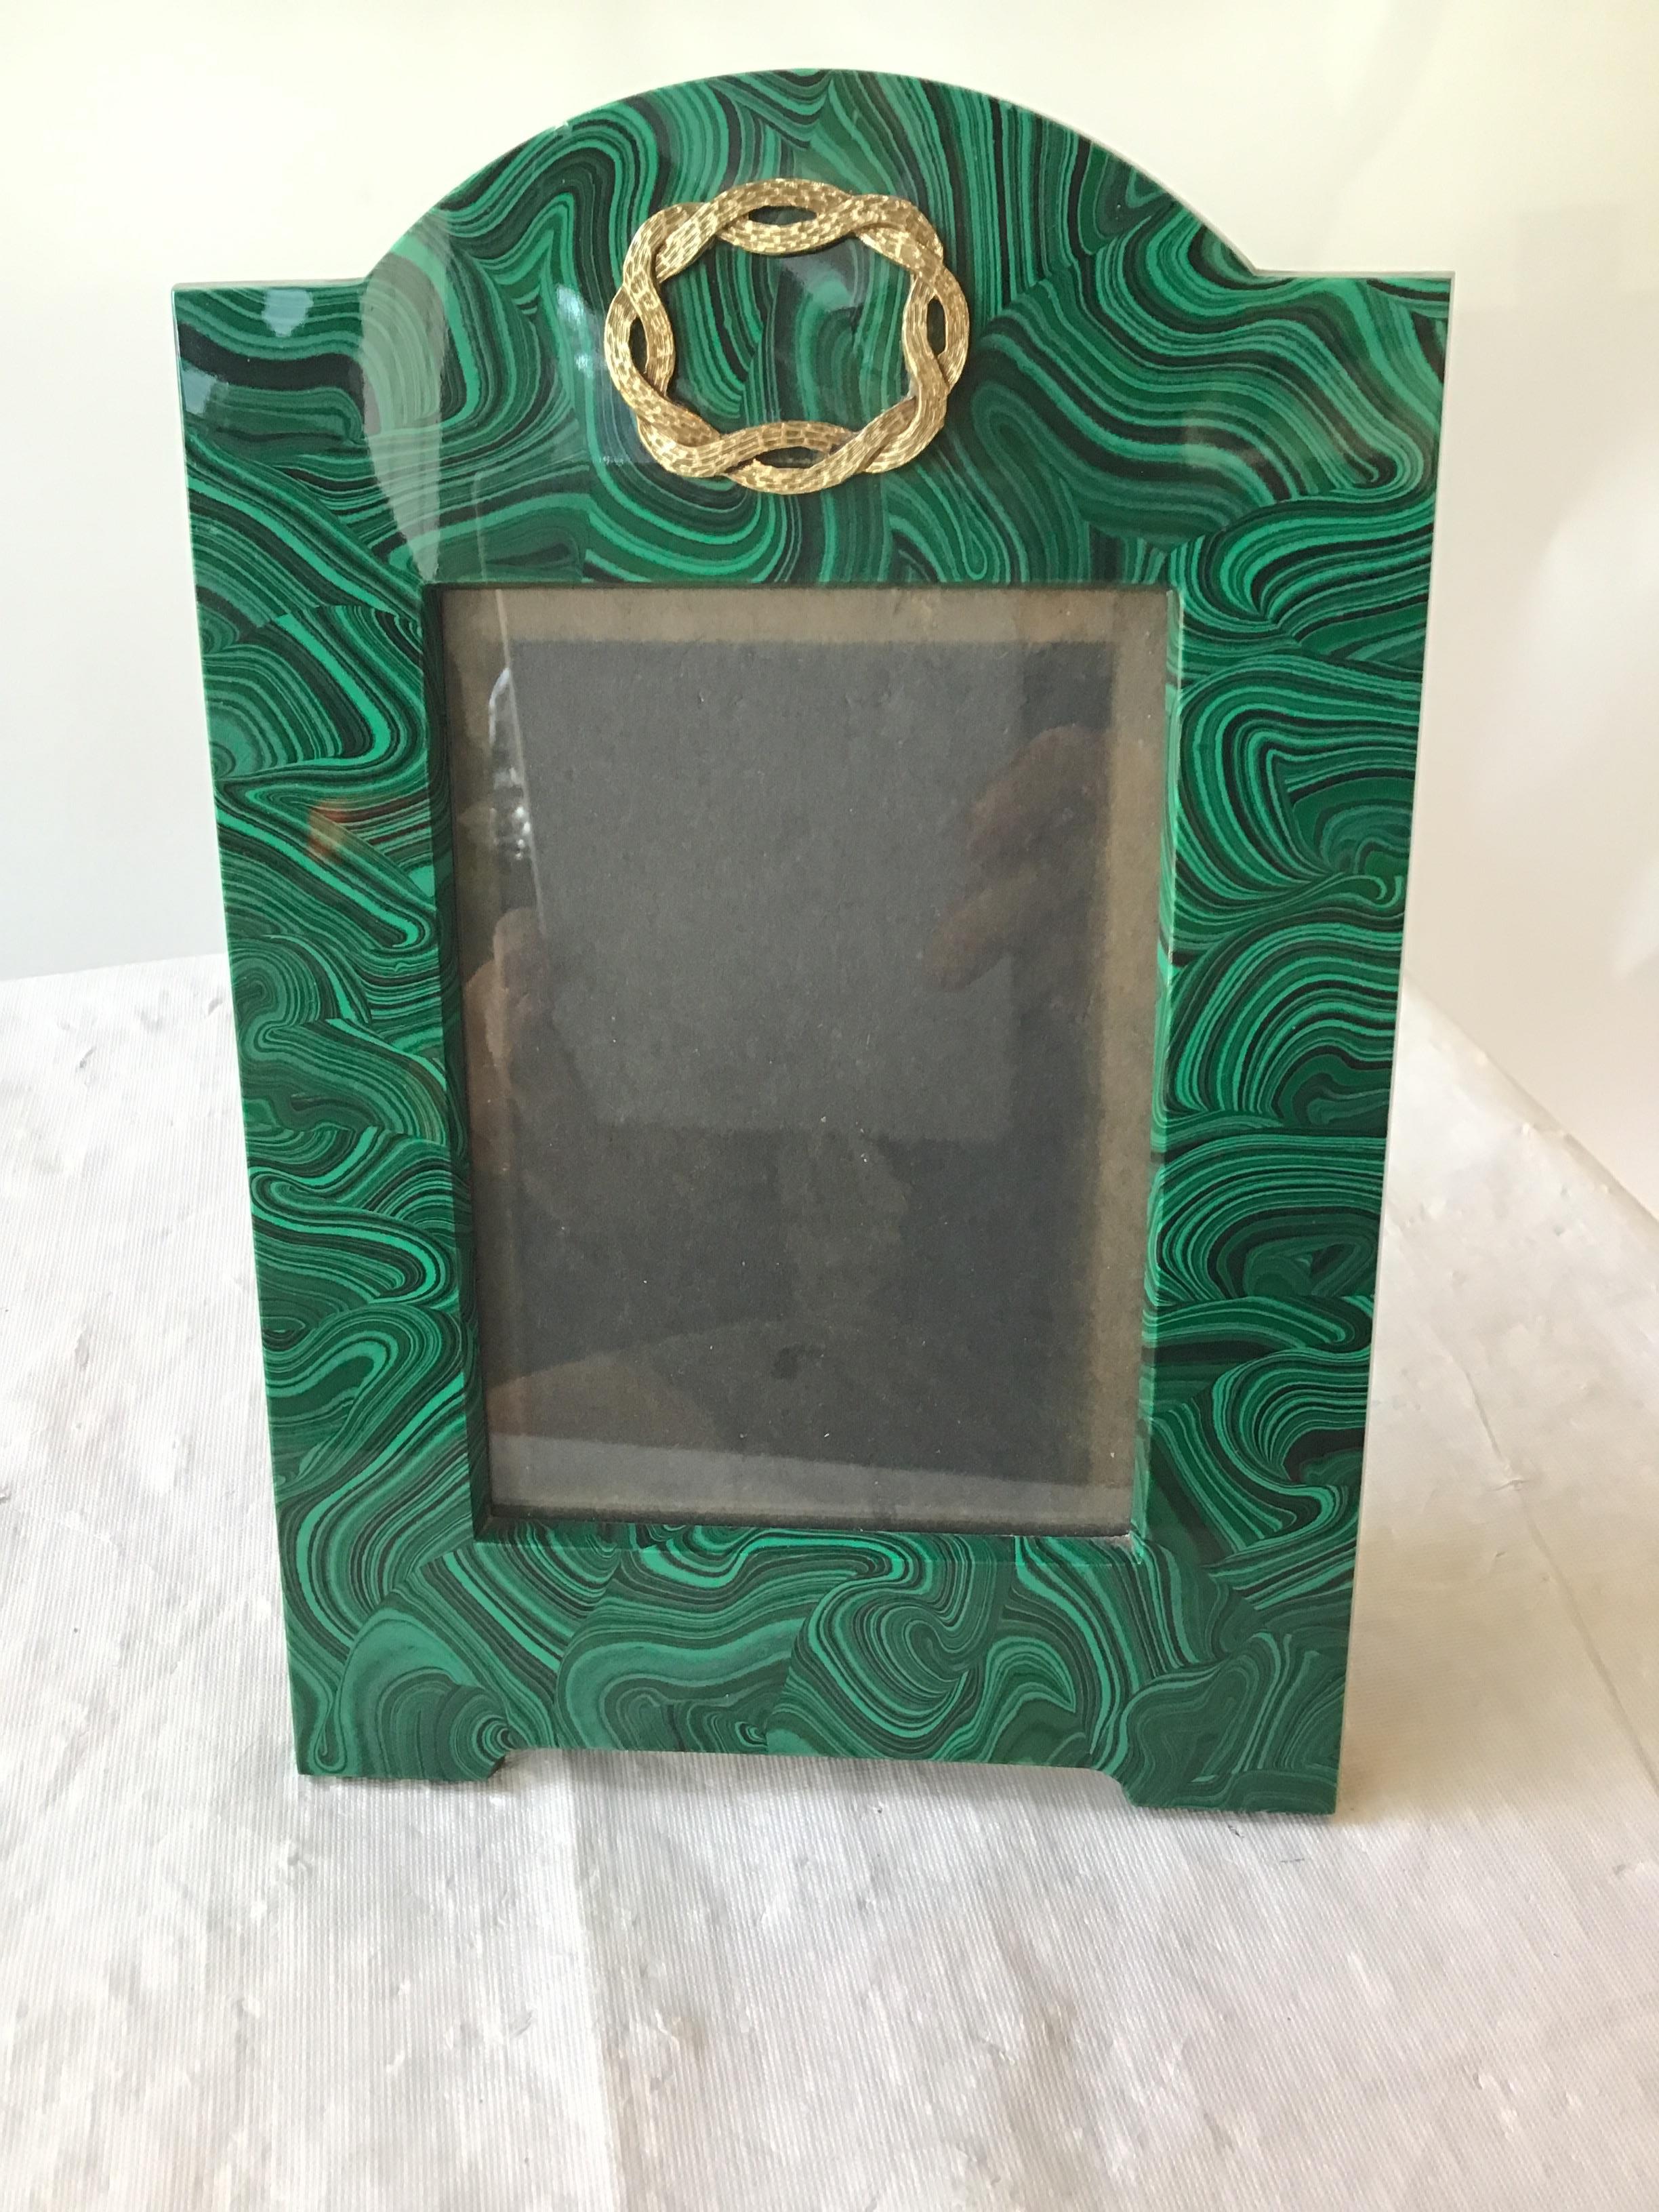 Faux Malachite picture frame made from resin. High quality, screw on back. Brass ornamentation.